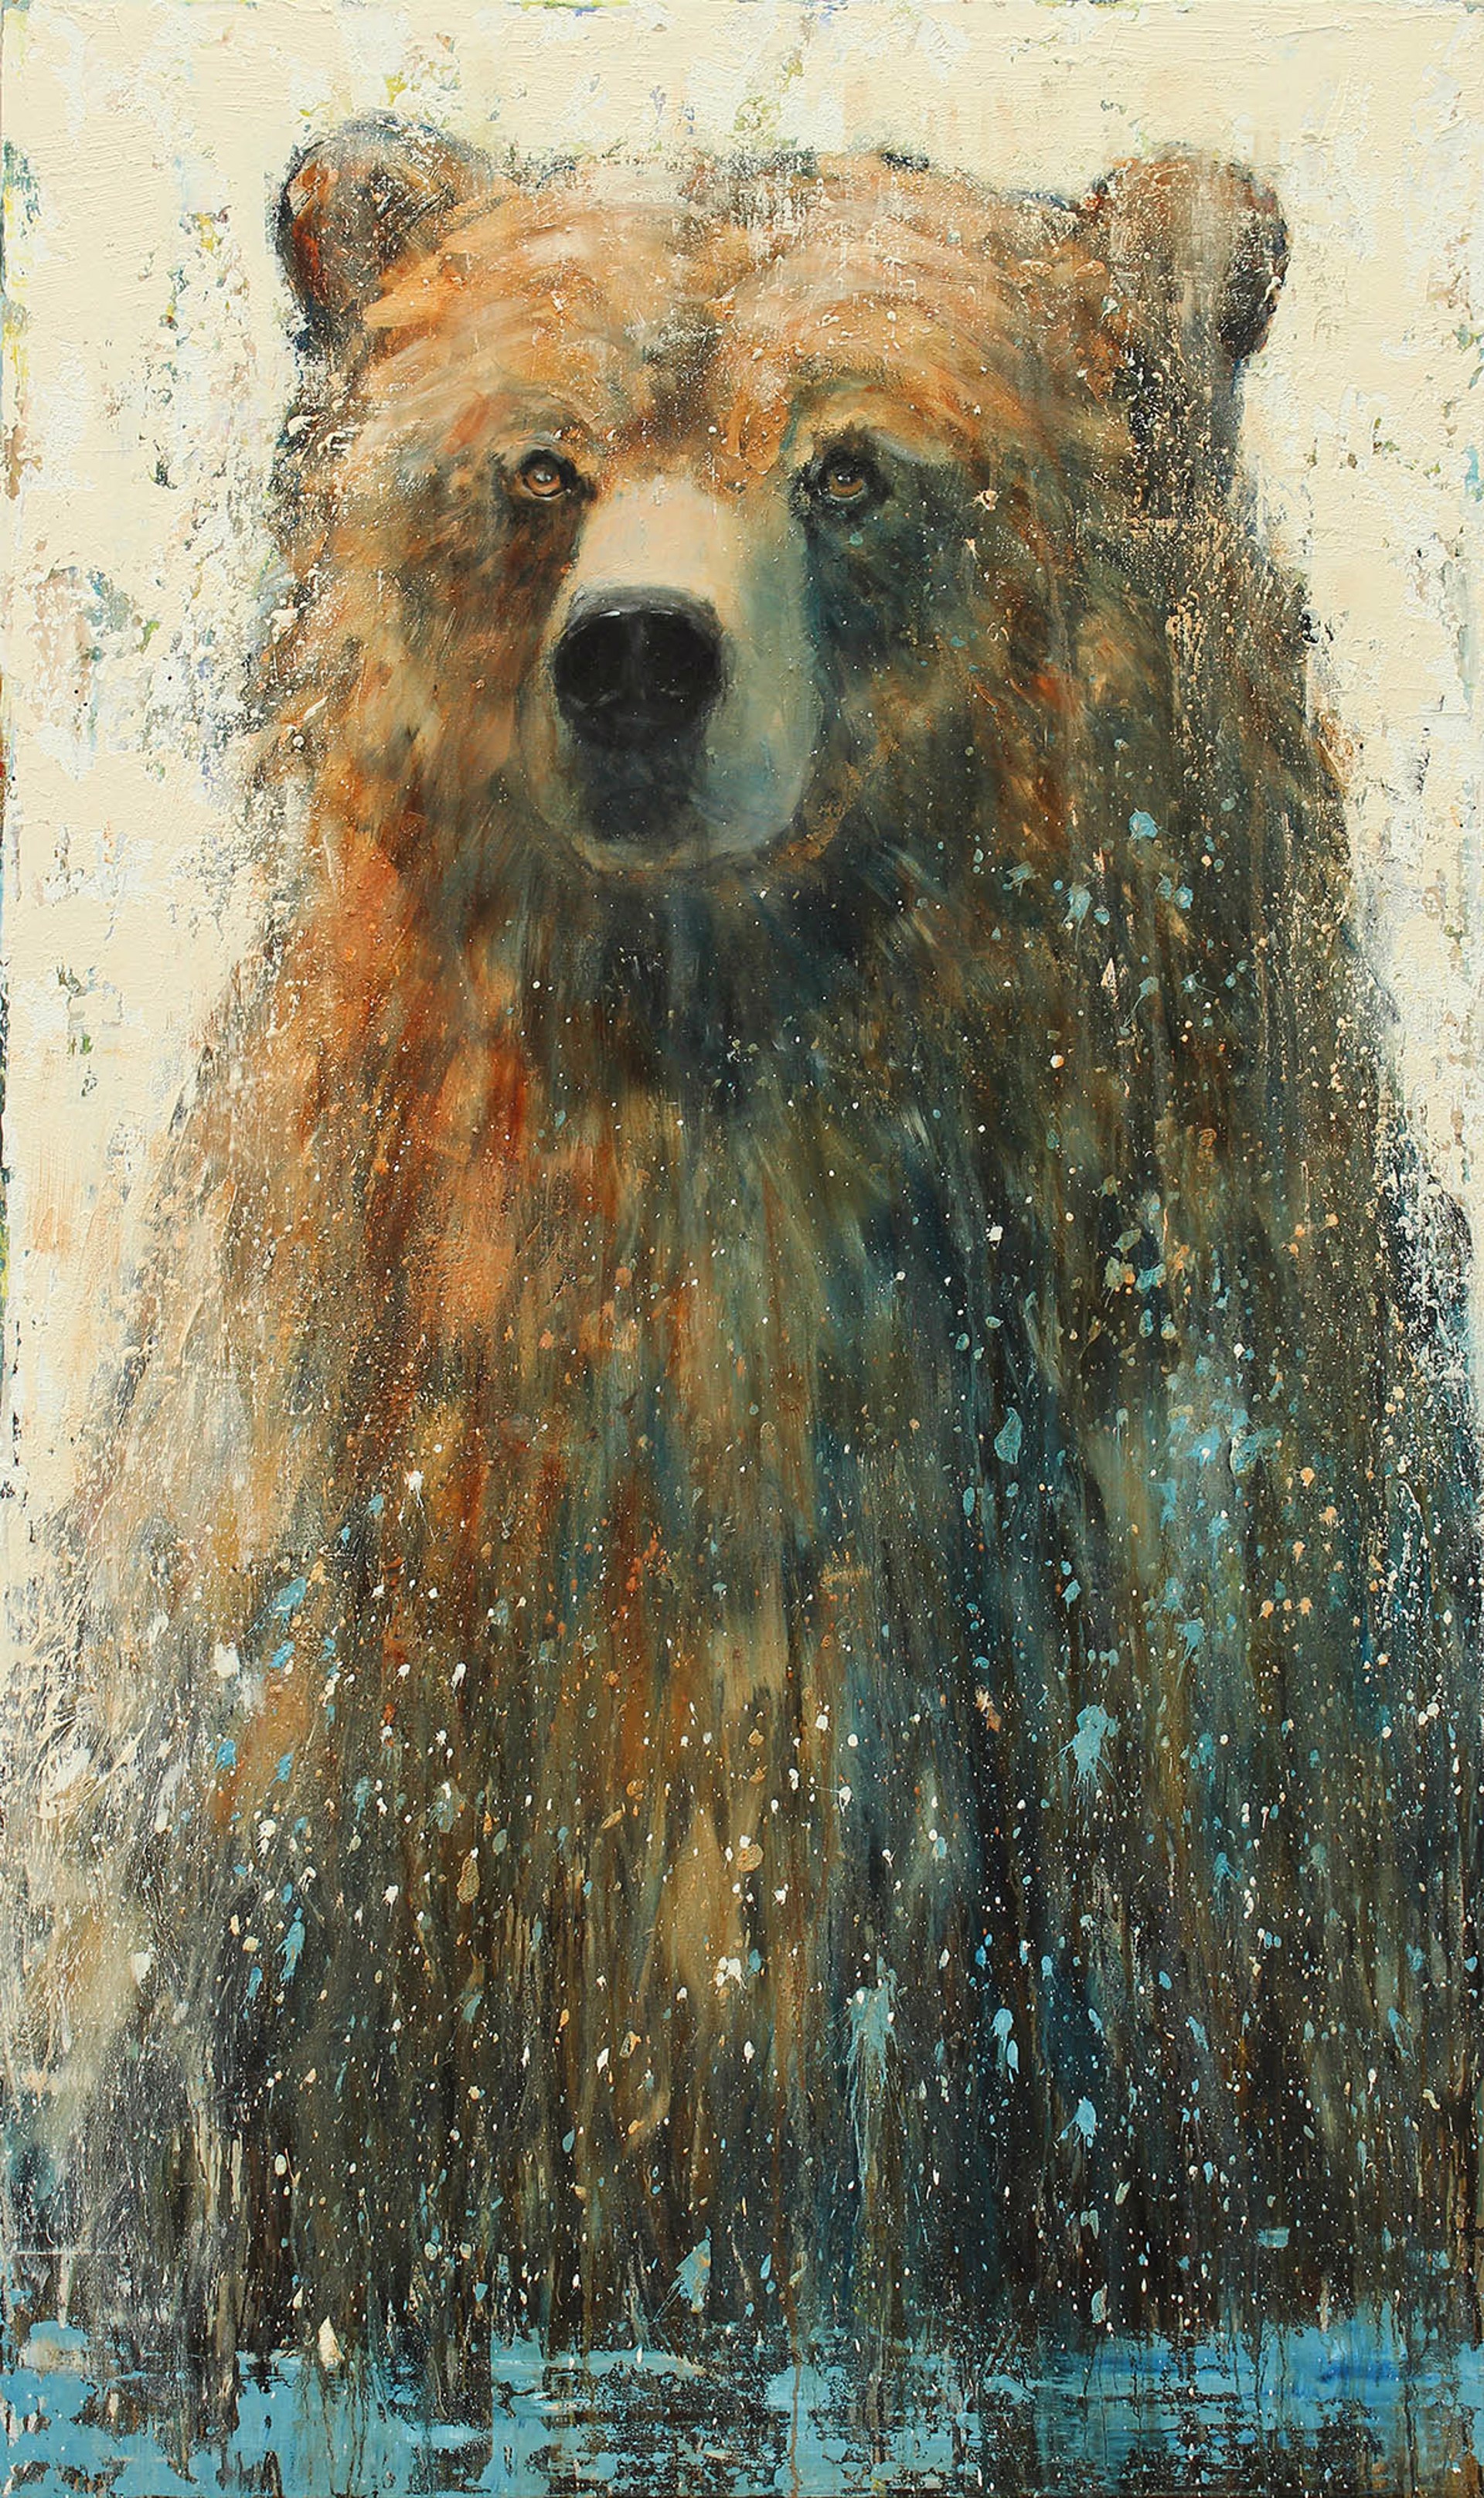 Original Mixed Media Painting Featuring a Grizzly Bear Portrait Over Abstract Cream Background With Dripping Details And Hints Of Blue